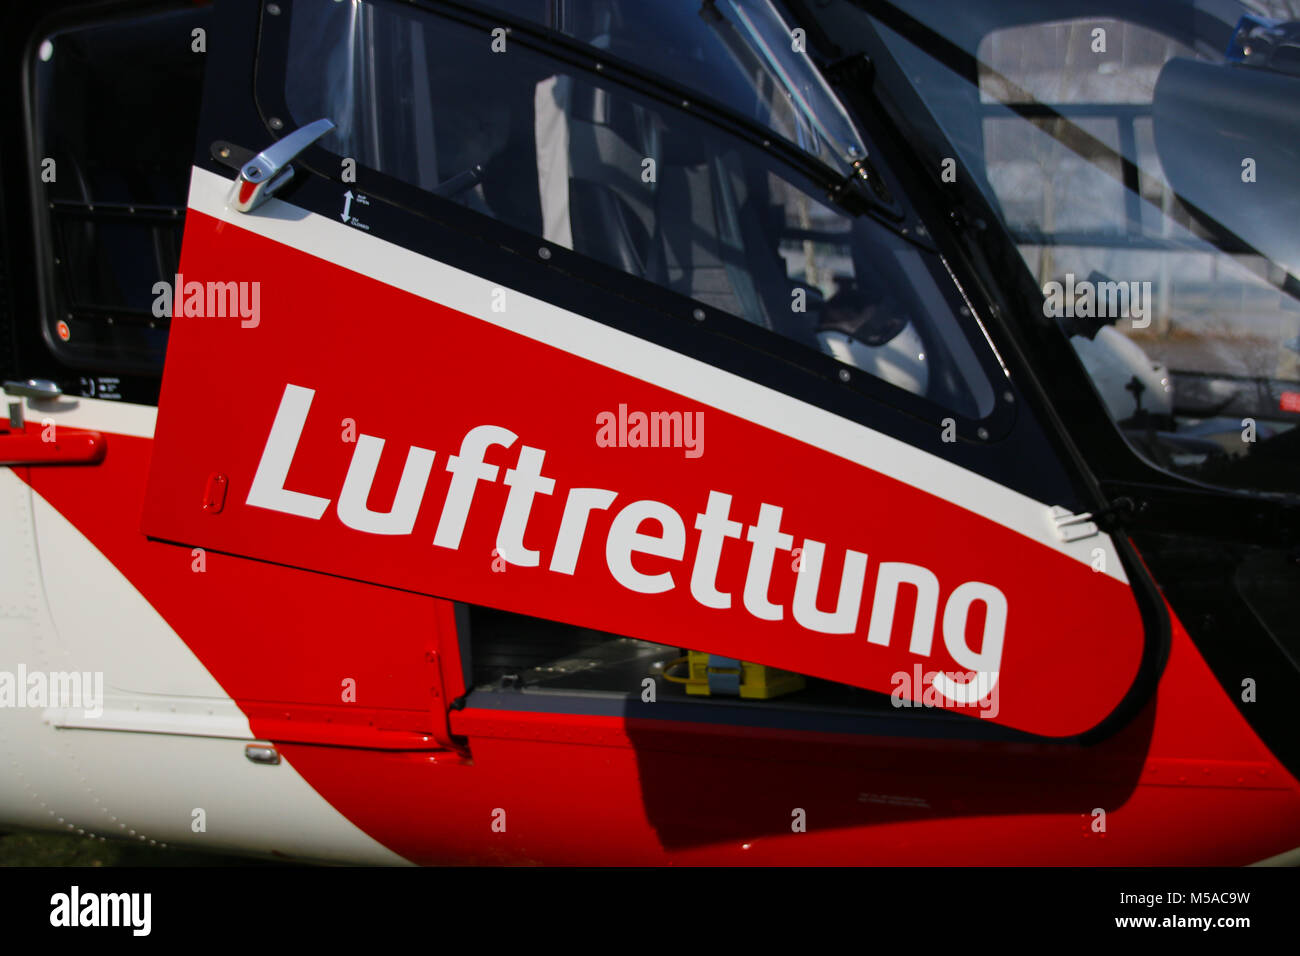 Magdeburg, Germany - 21 February 2018: Door of a helicopter of the German air rescue service with the lettering 'Luftrettung' (air rescue) Stock Photo